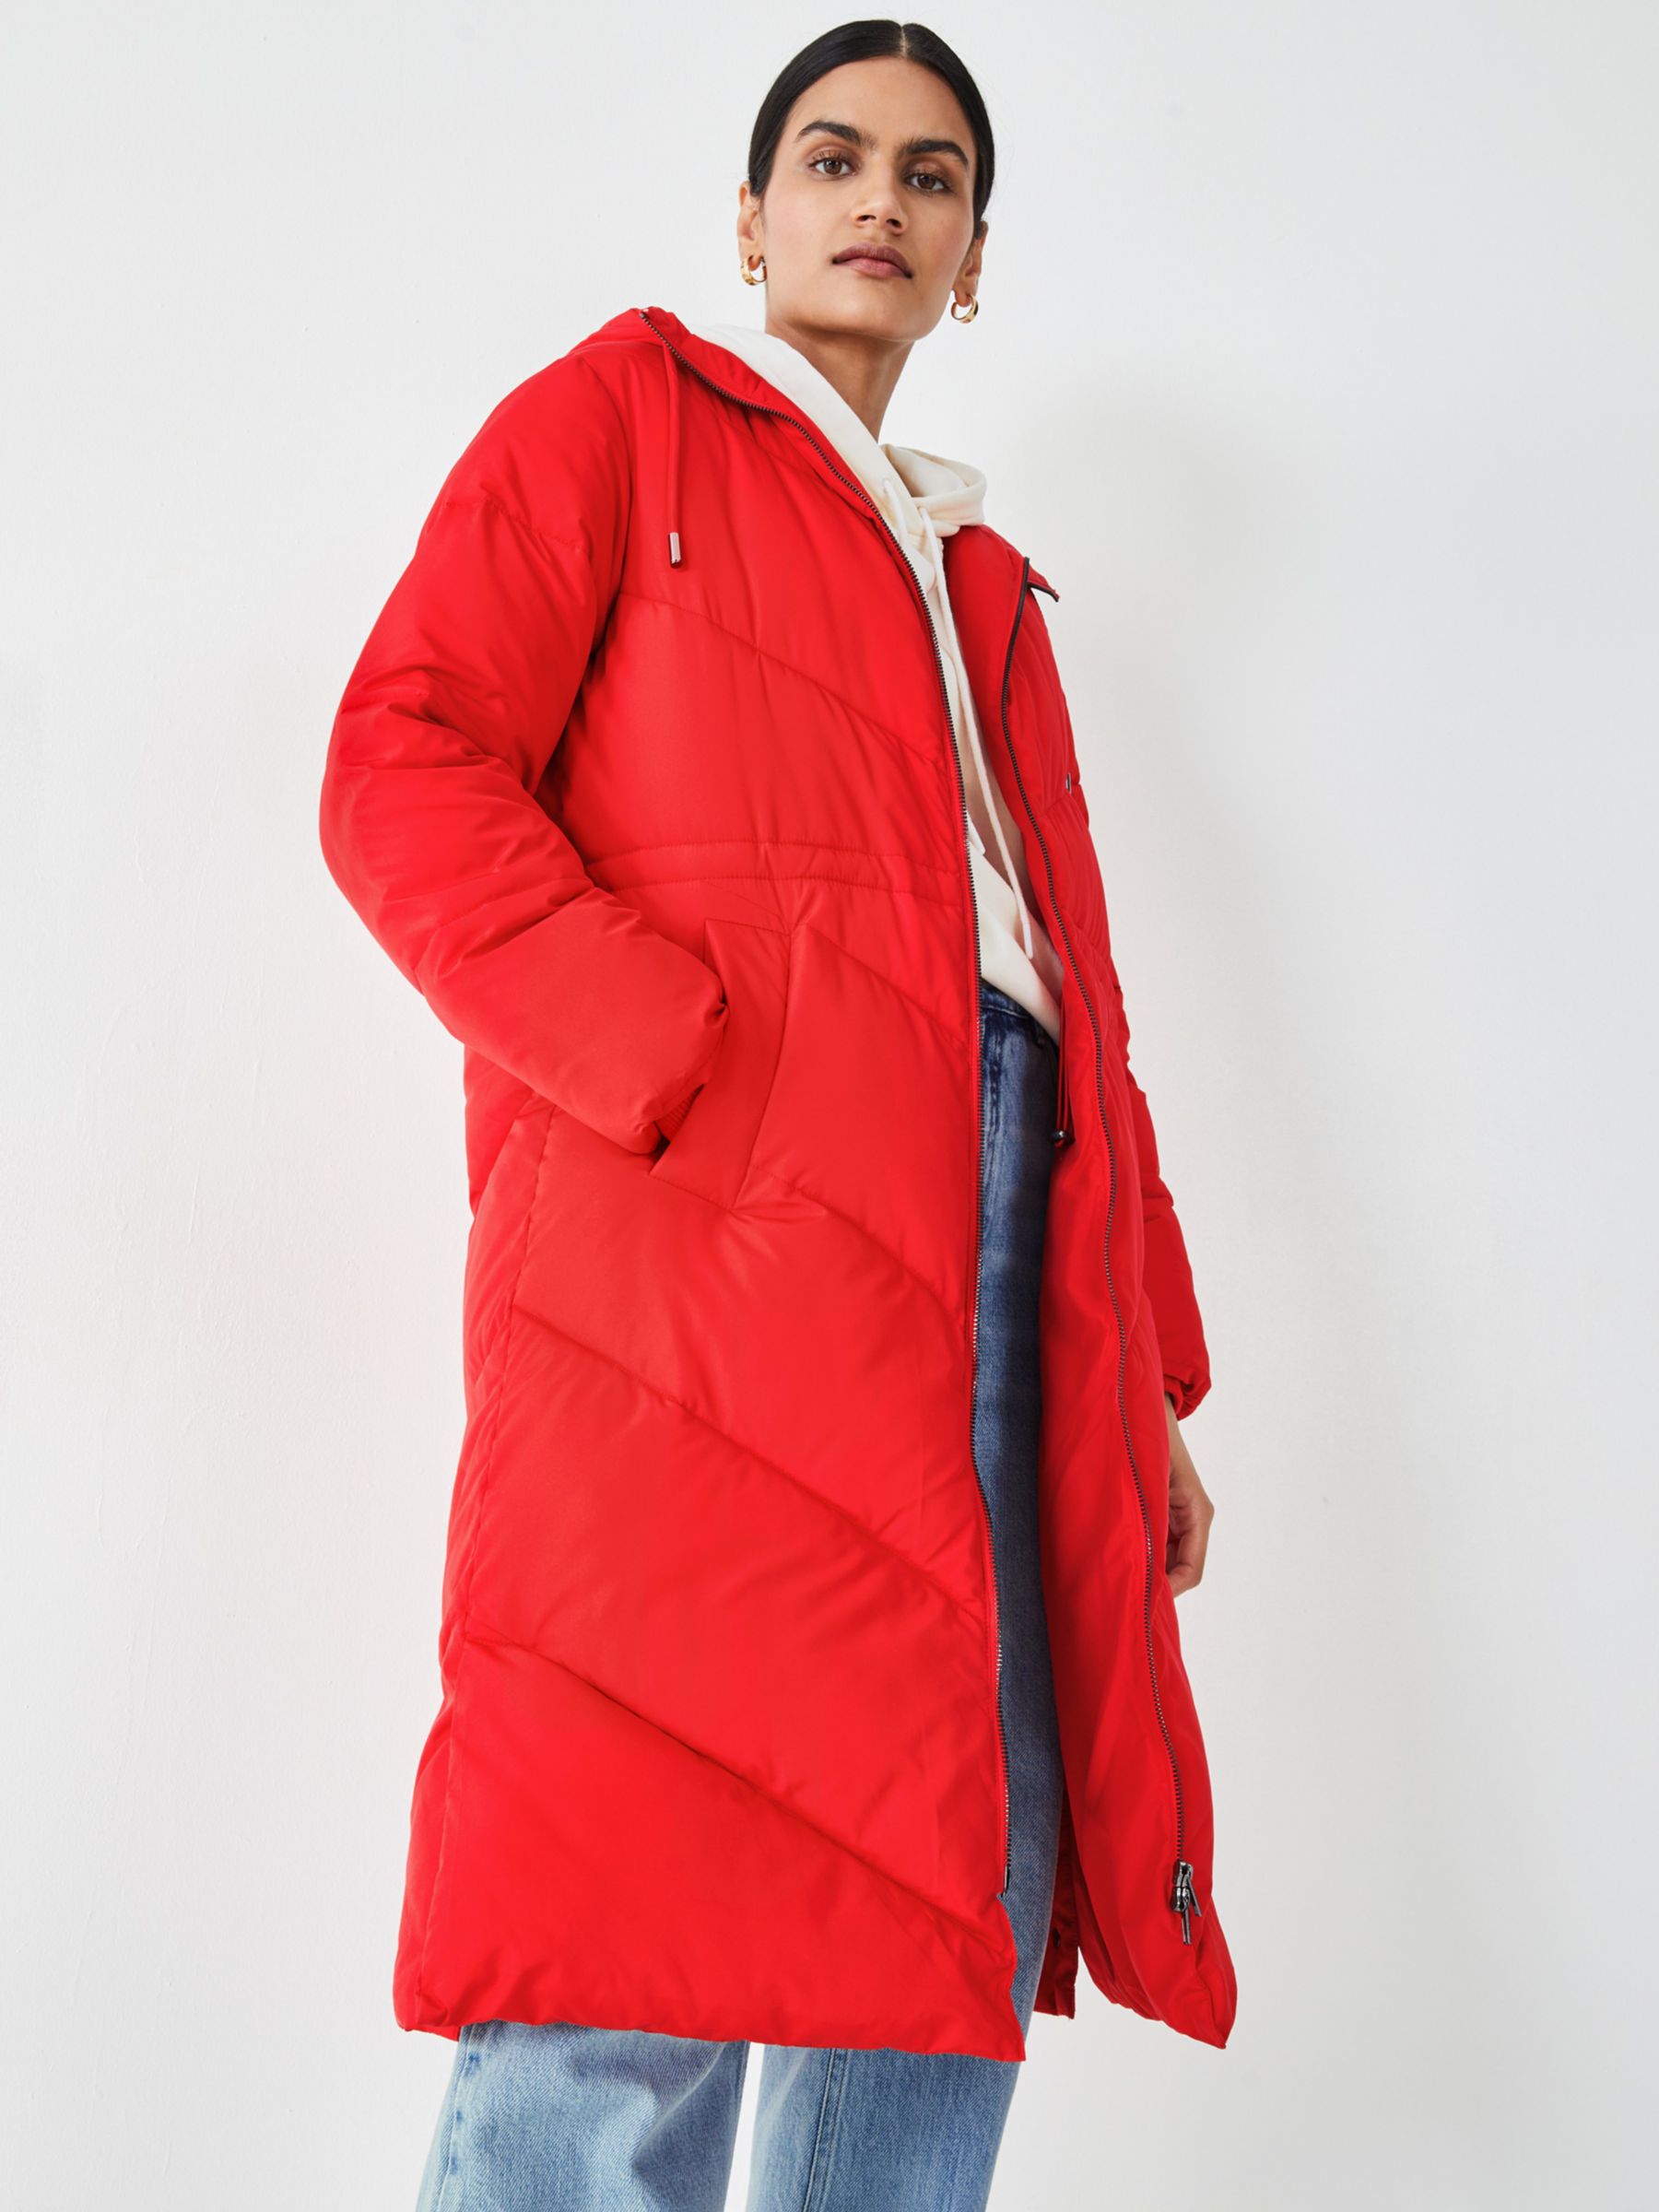 HUSH Elci Mid Length Quilted Jacket, Bright Red at John Lewis & Partners